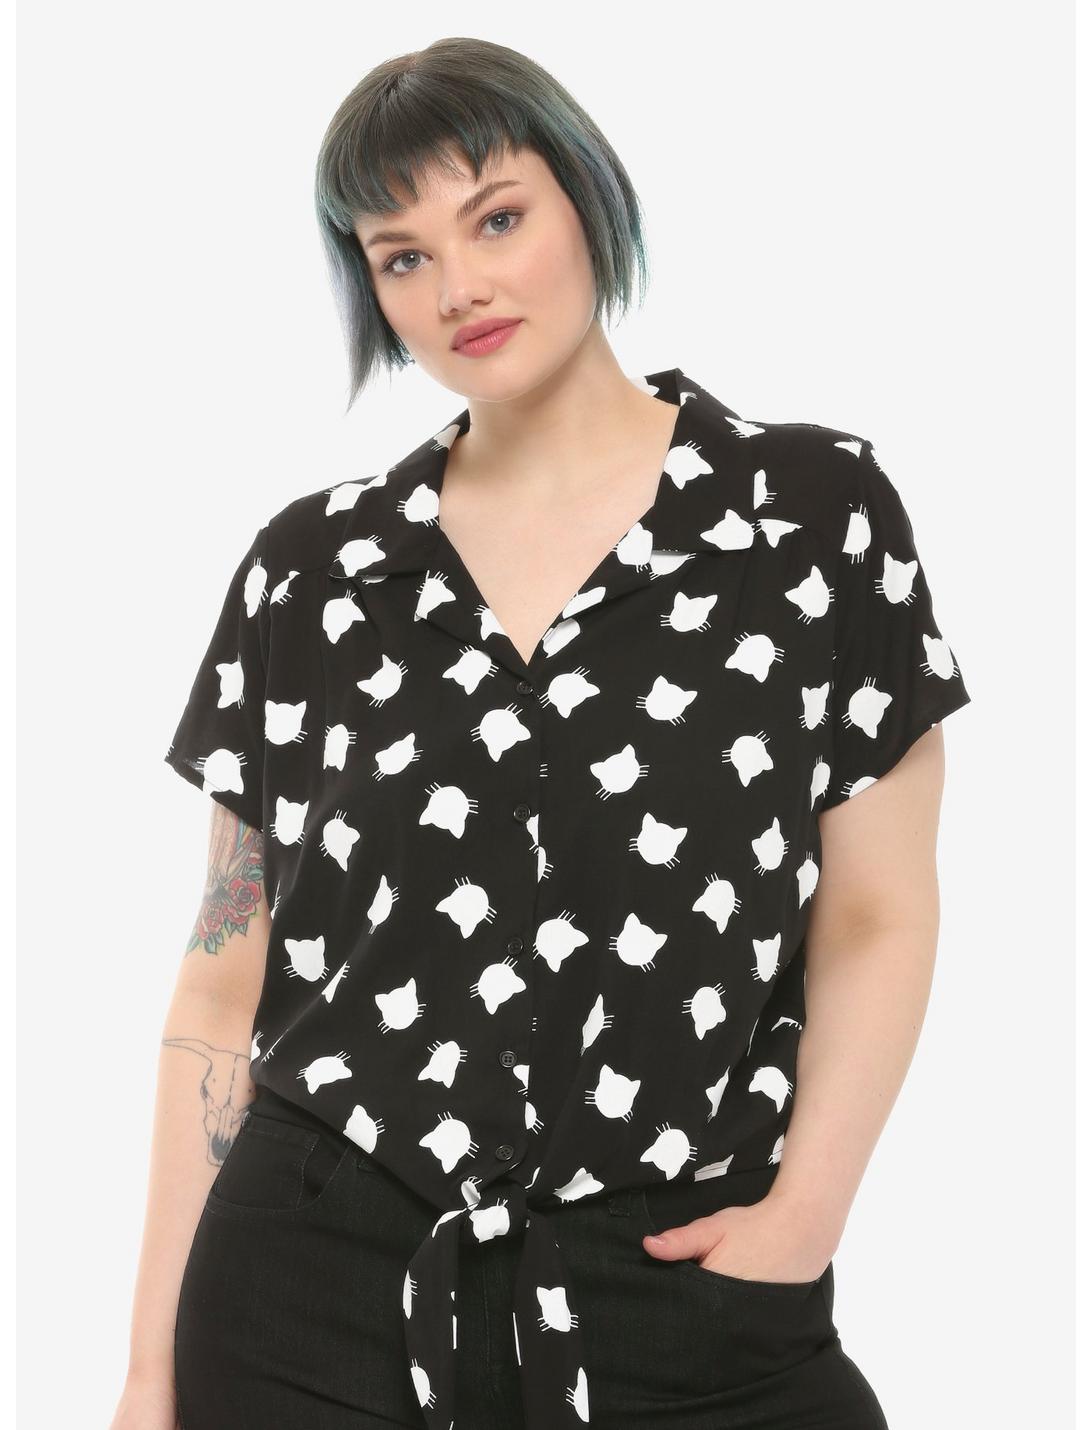 White Cat Silhouette Tie Front Girls Woven Button-Up Plus Size, BLACK, hi-res